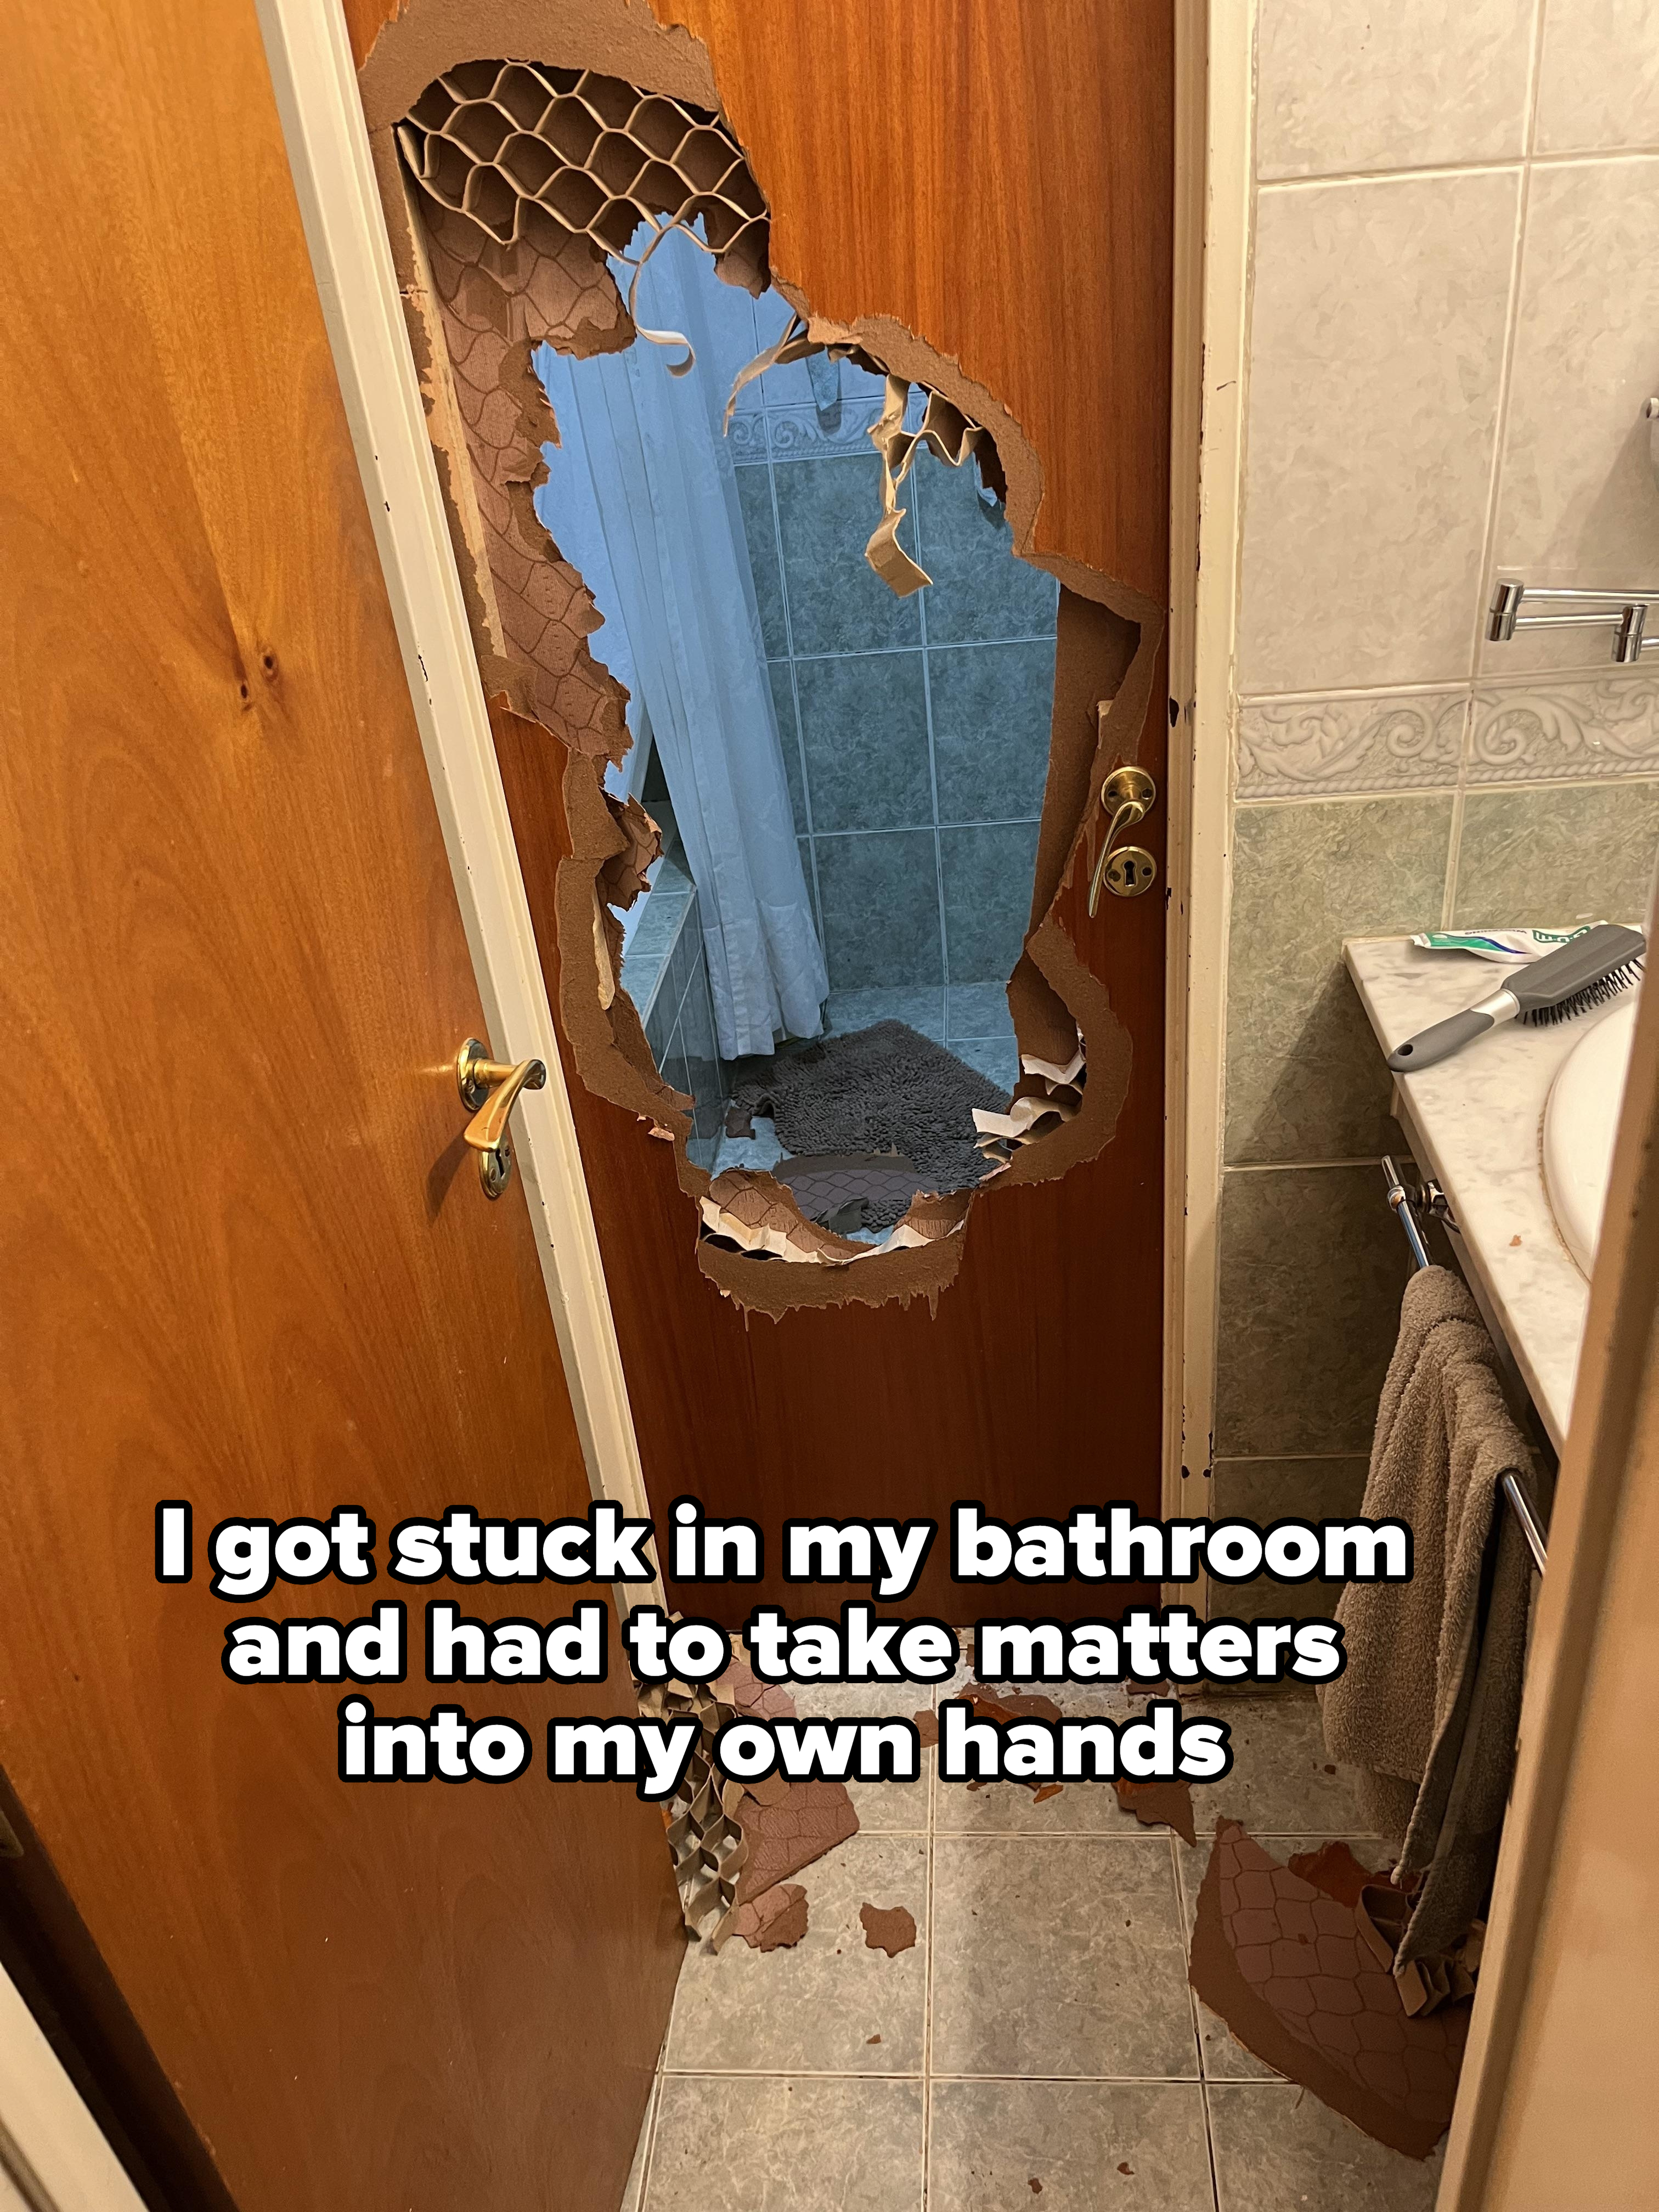 Bathroom door with a large, irregular hole revealing towels and shower curtain inside